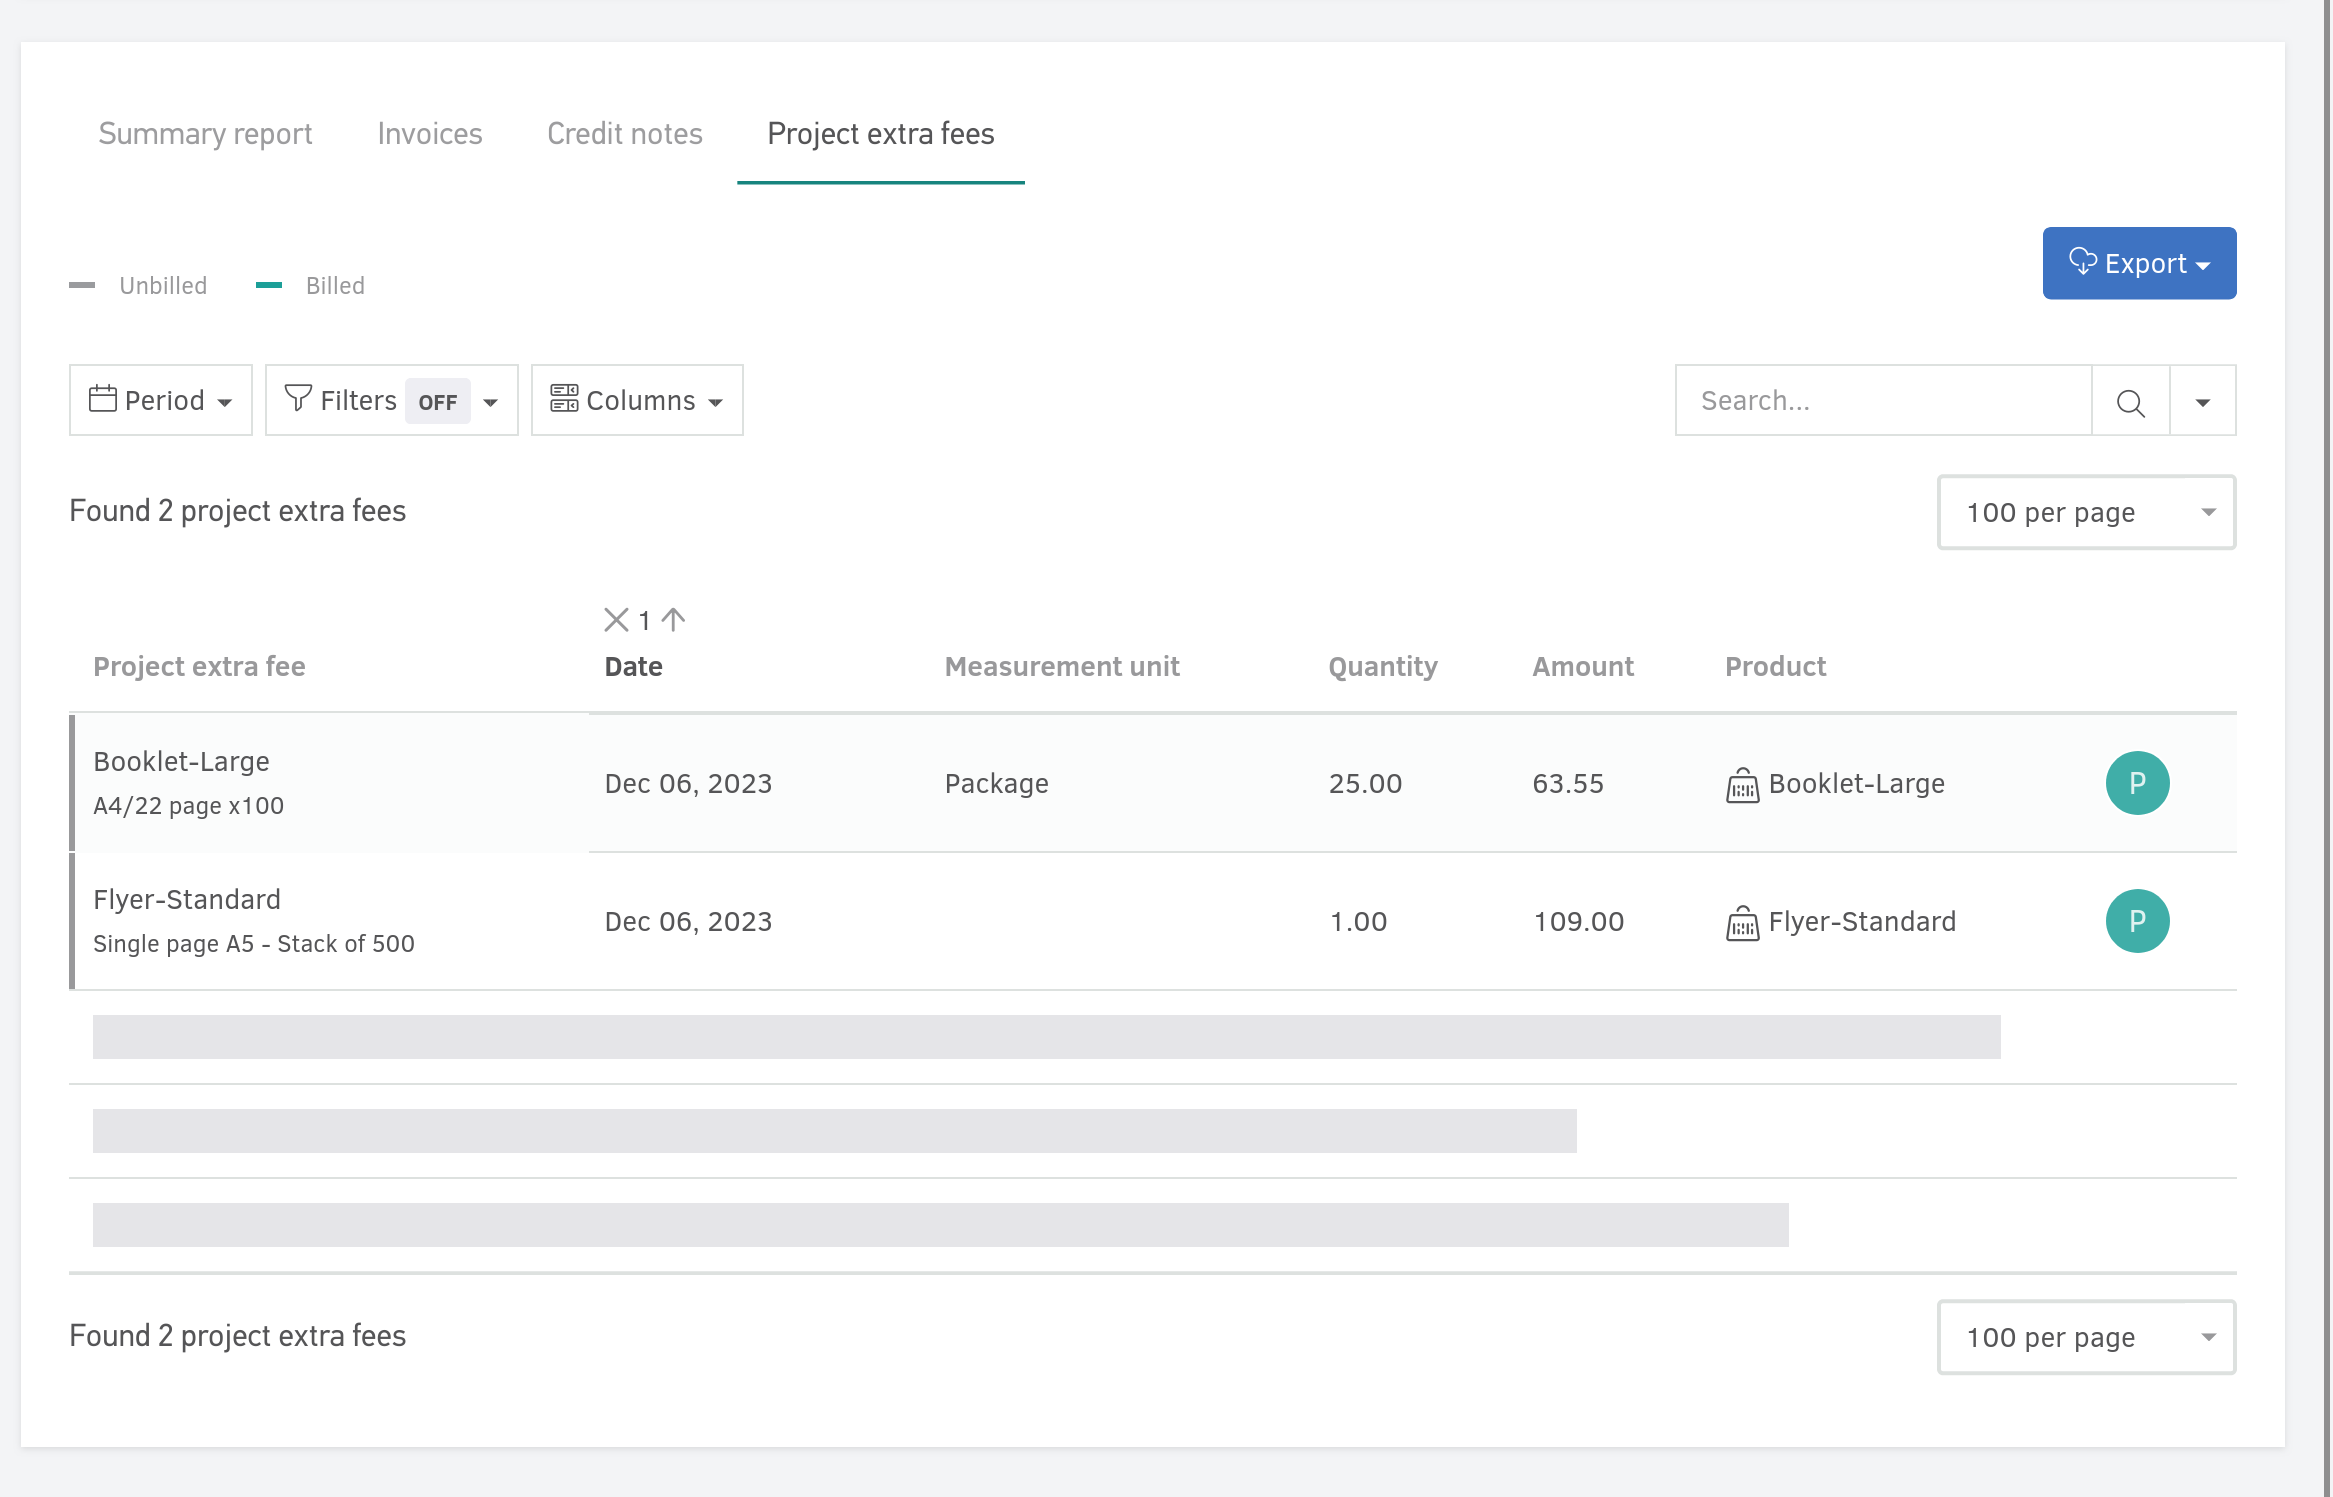 View project extra fees in the client portal